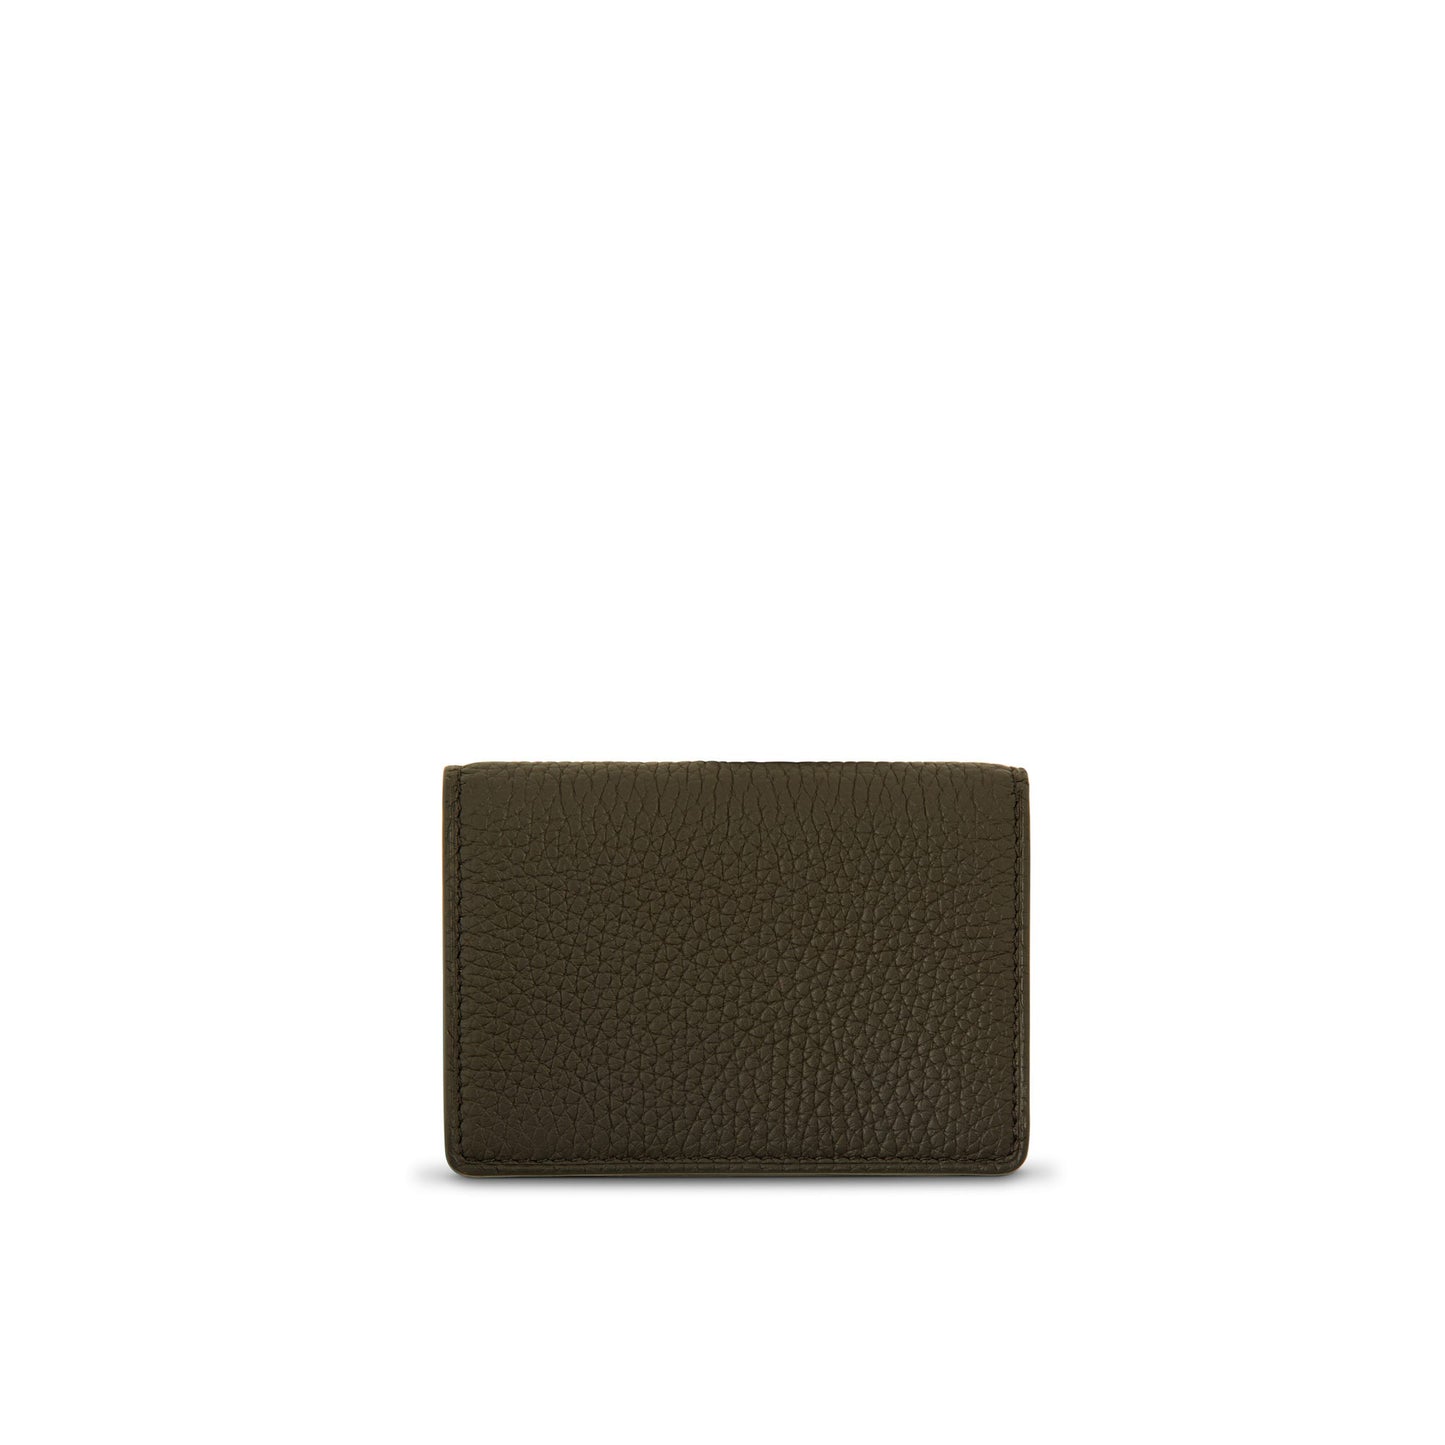 GMT Folding Card Holder in Soft Grain Leather